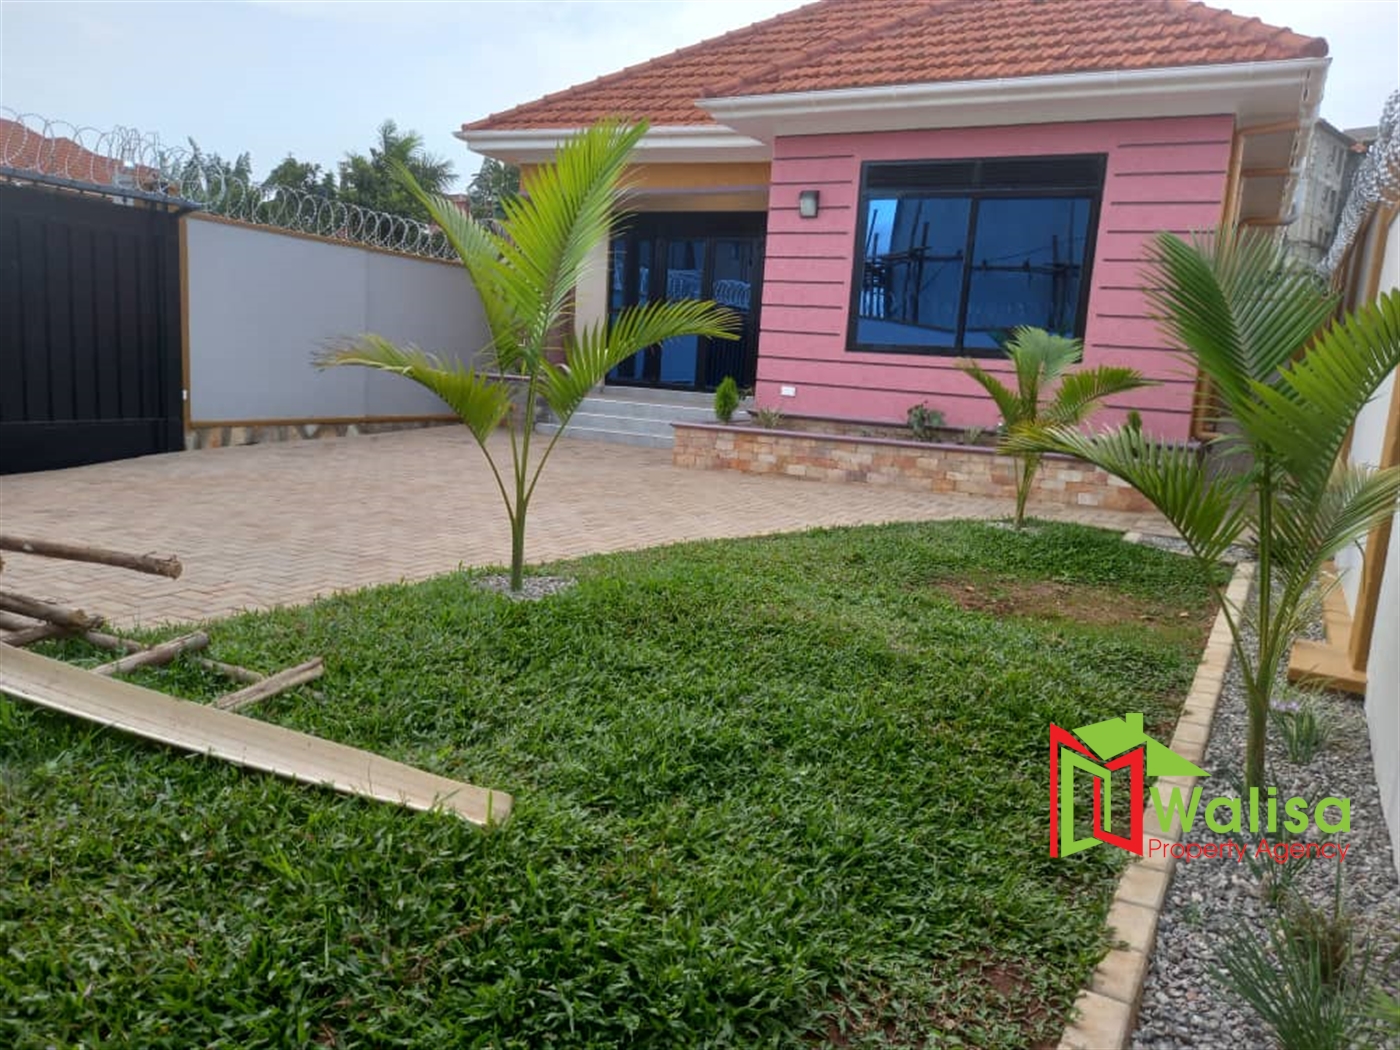 Town House for sale in Kungu Wakiso